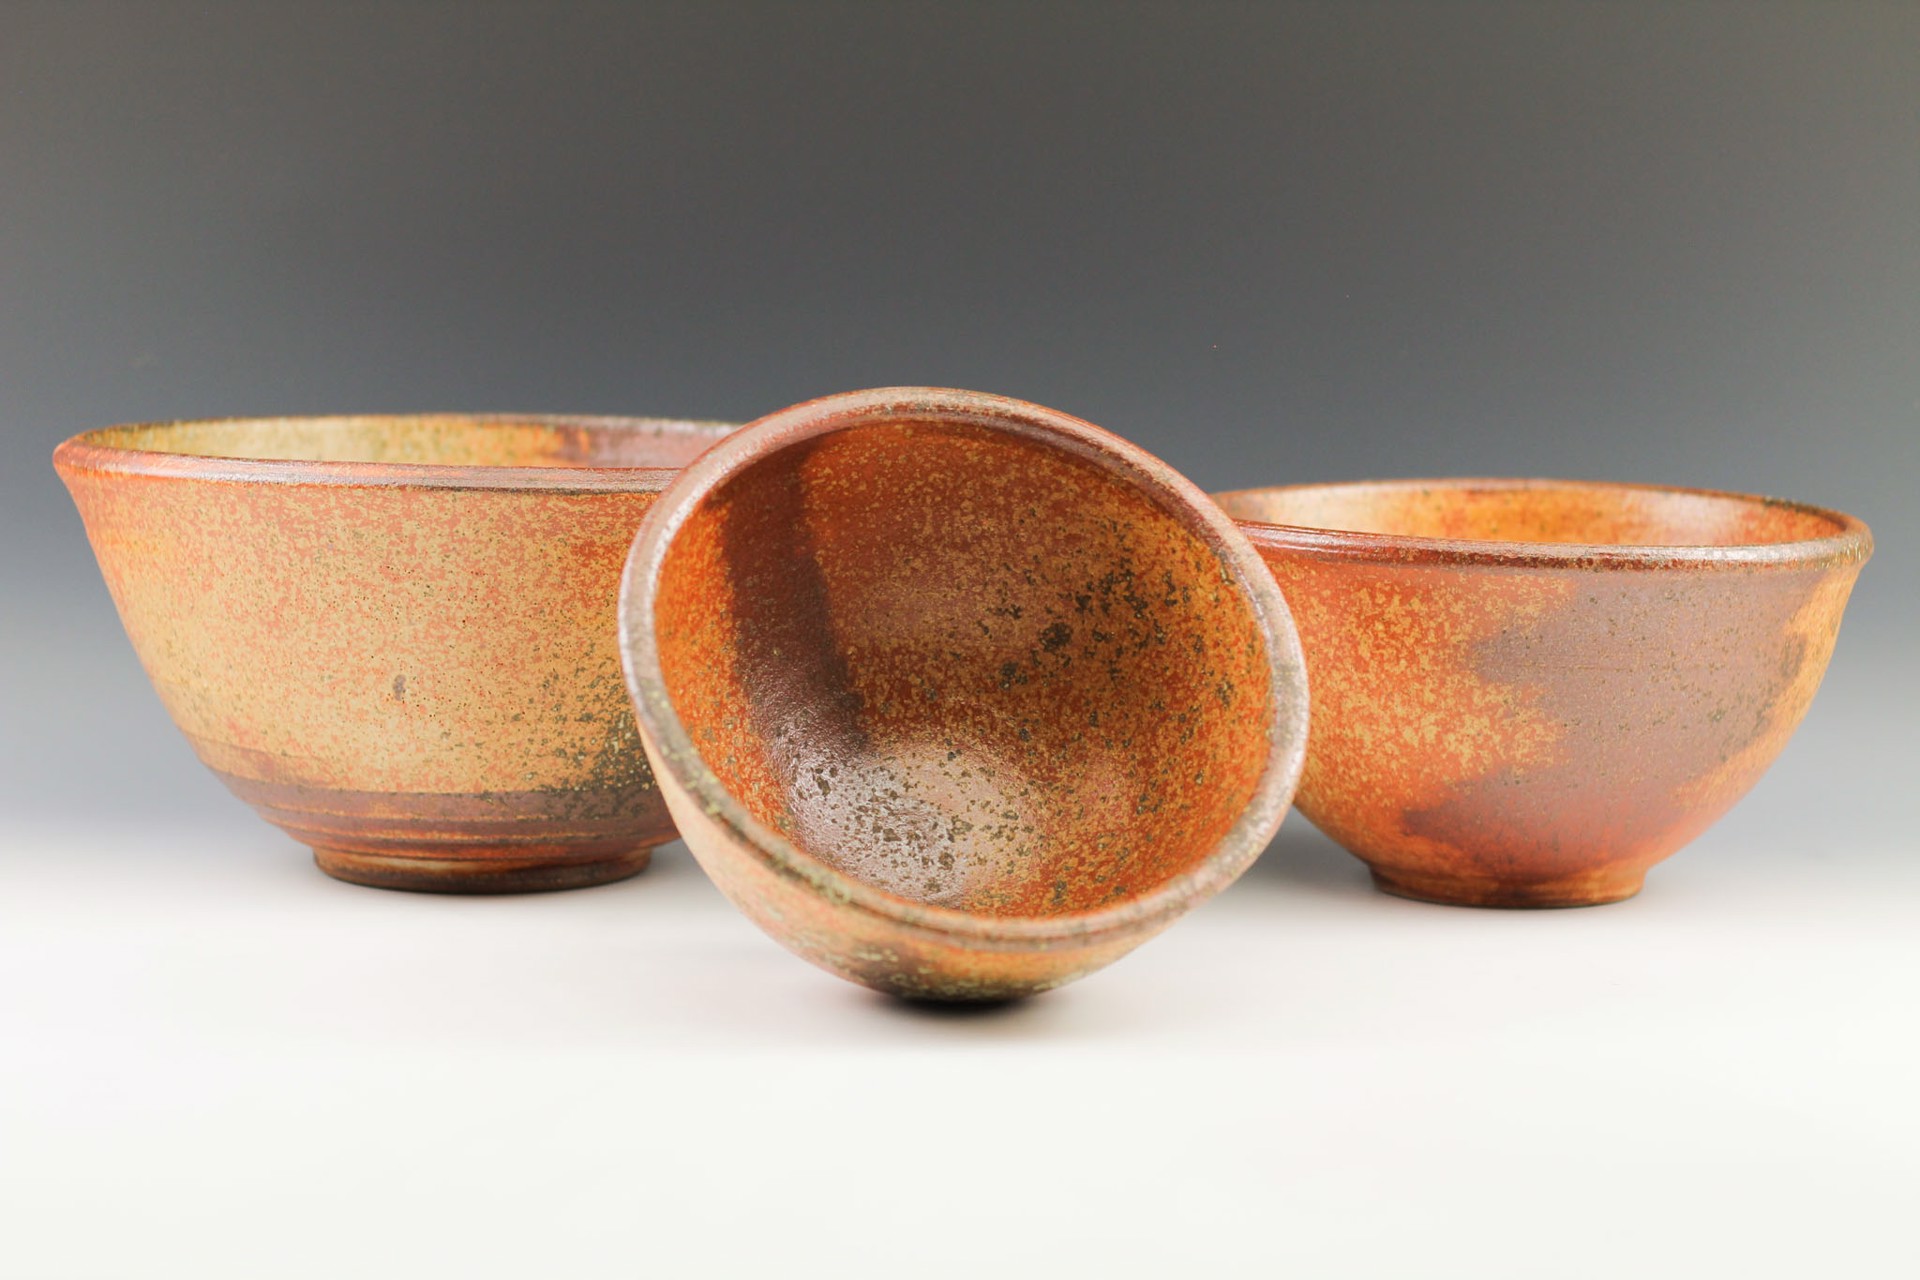 Nesting Bowls (Set of 3) by George Lowe